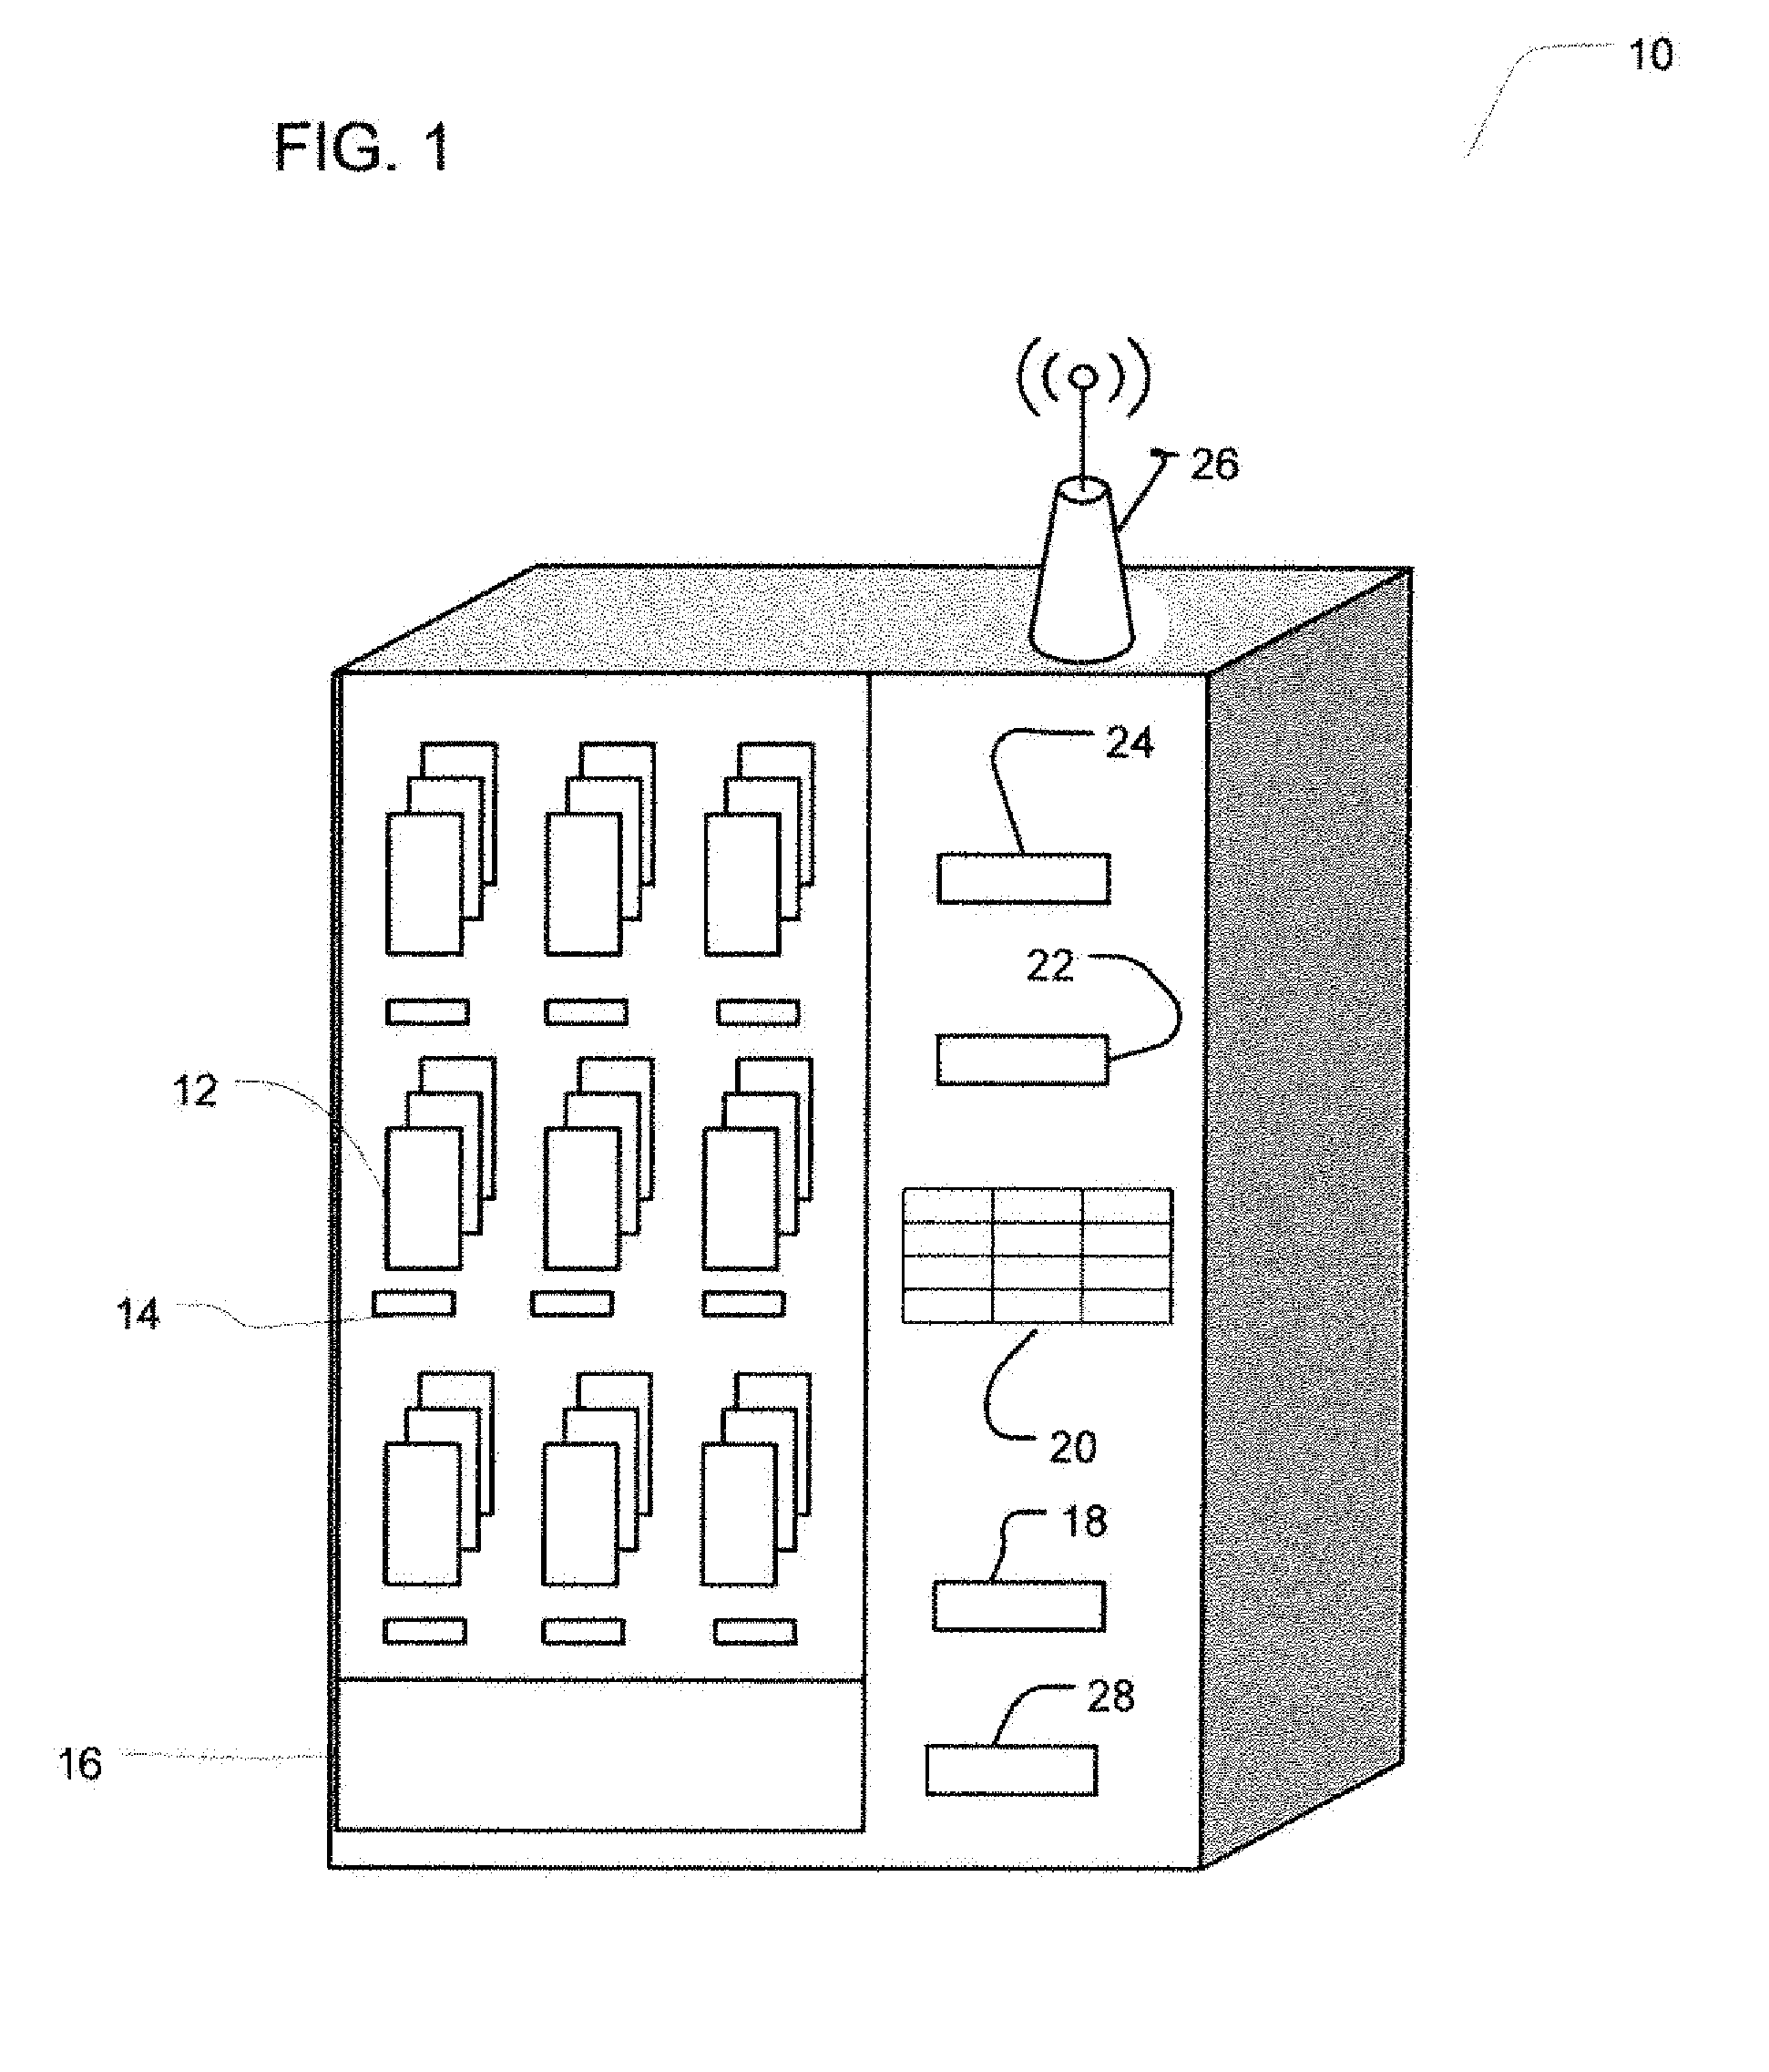 Systems and methods for environmental currency purchasing and tracking